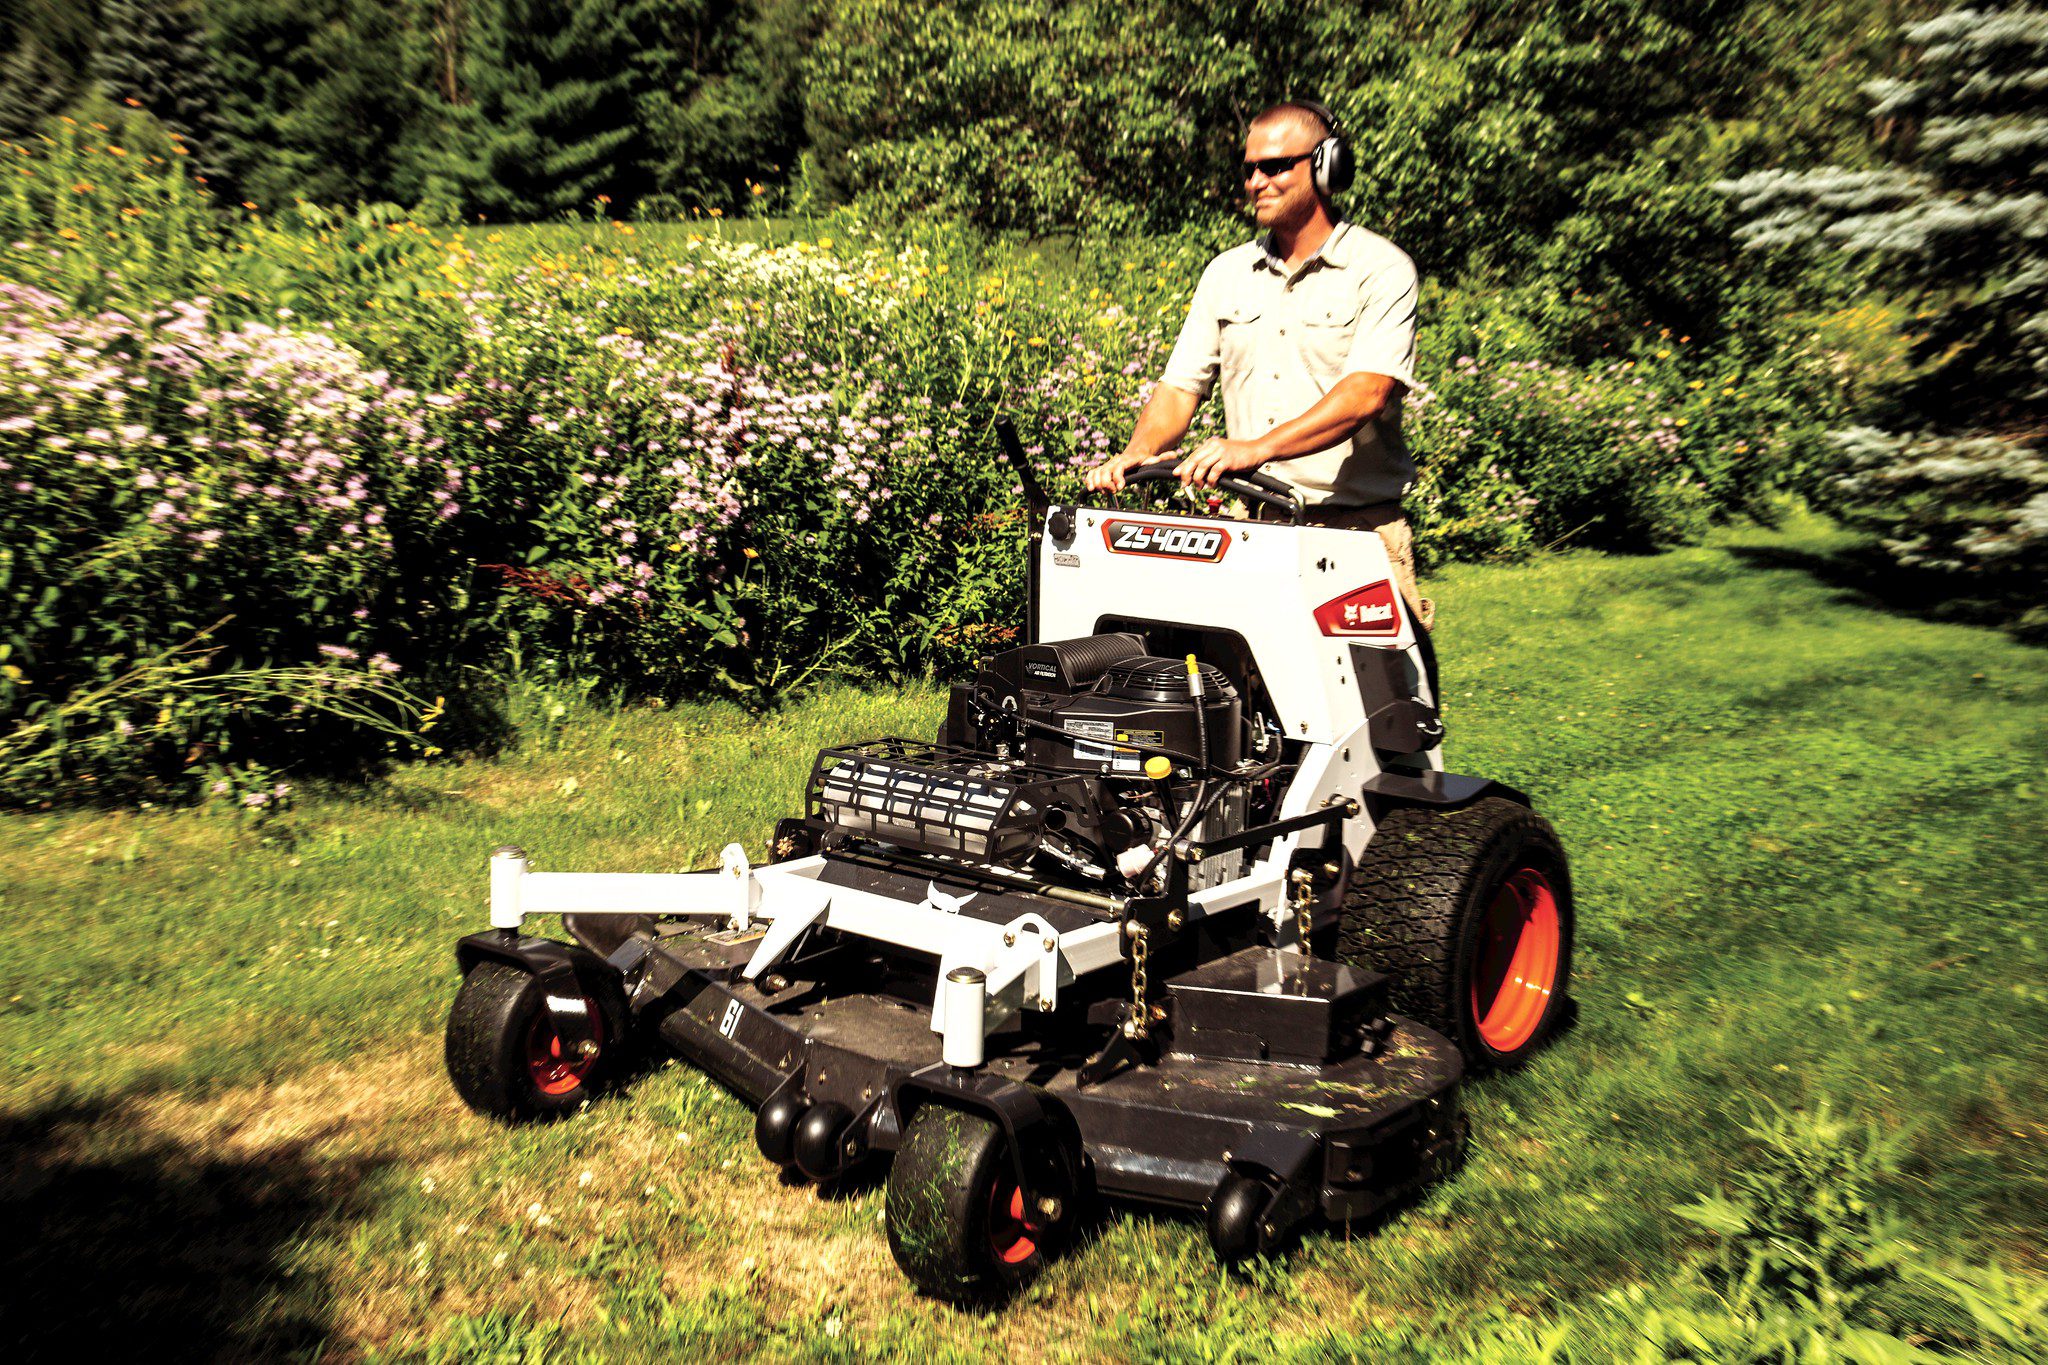 Browse Specs and more for the ZS4000 Stand-On Mower 52″ - Bobcat of the Rockies